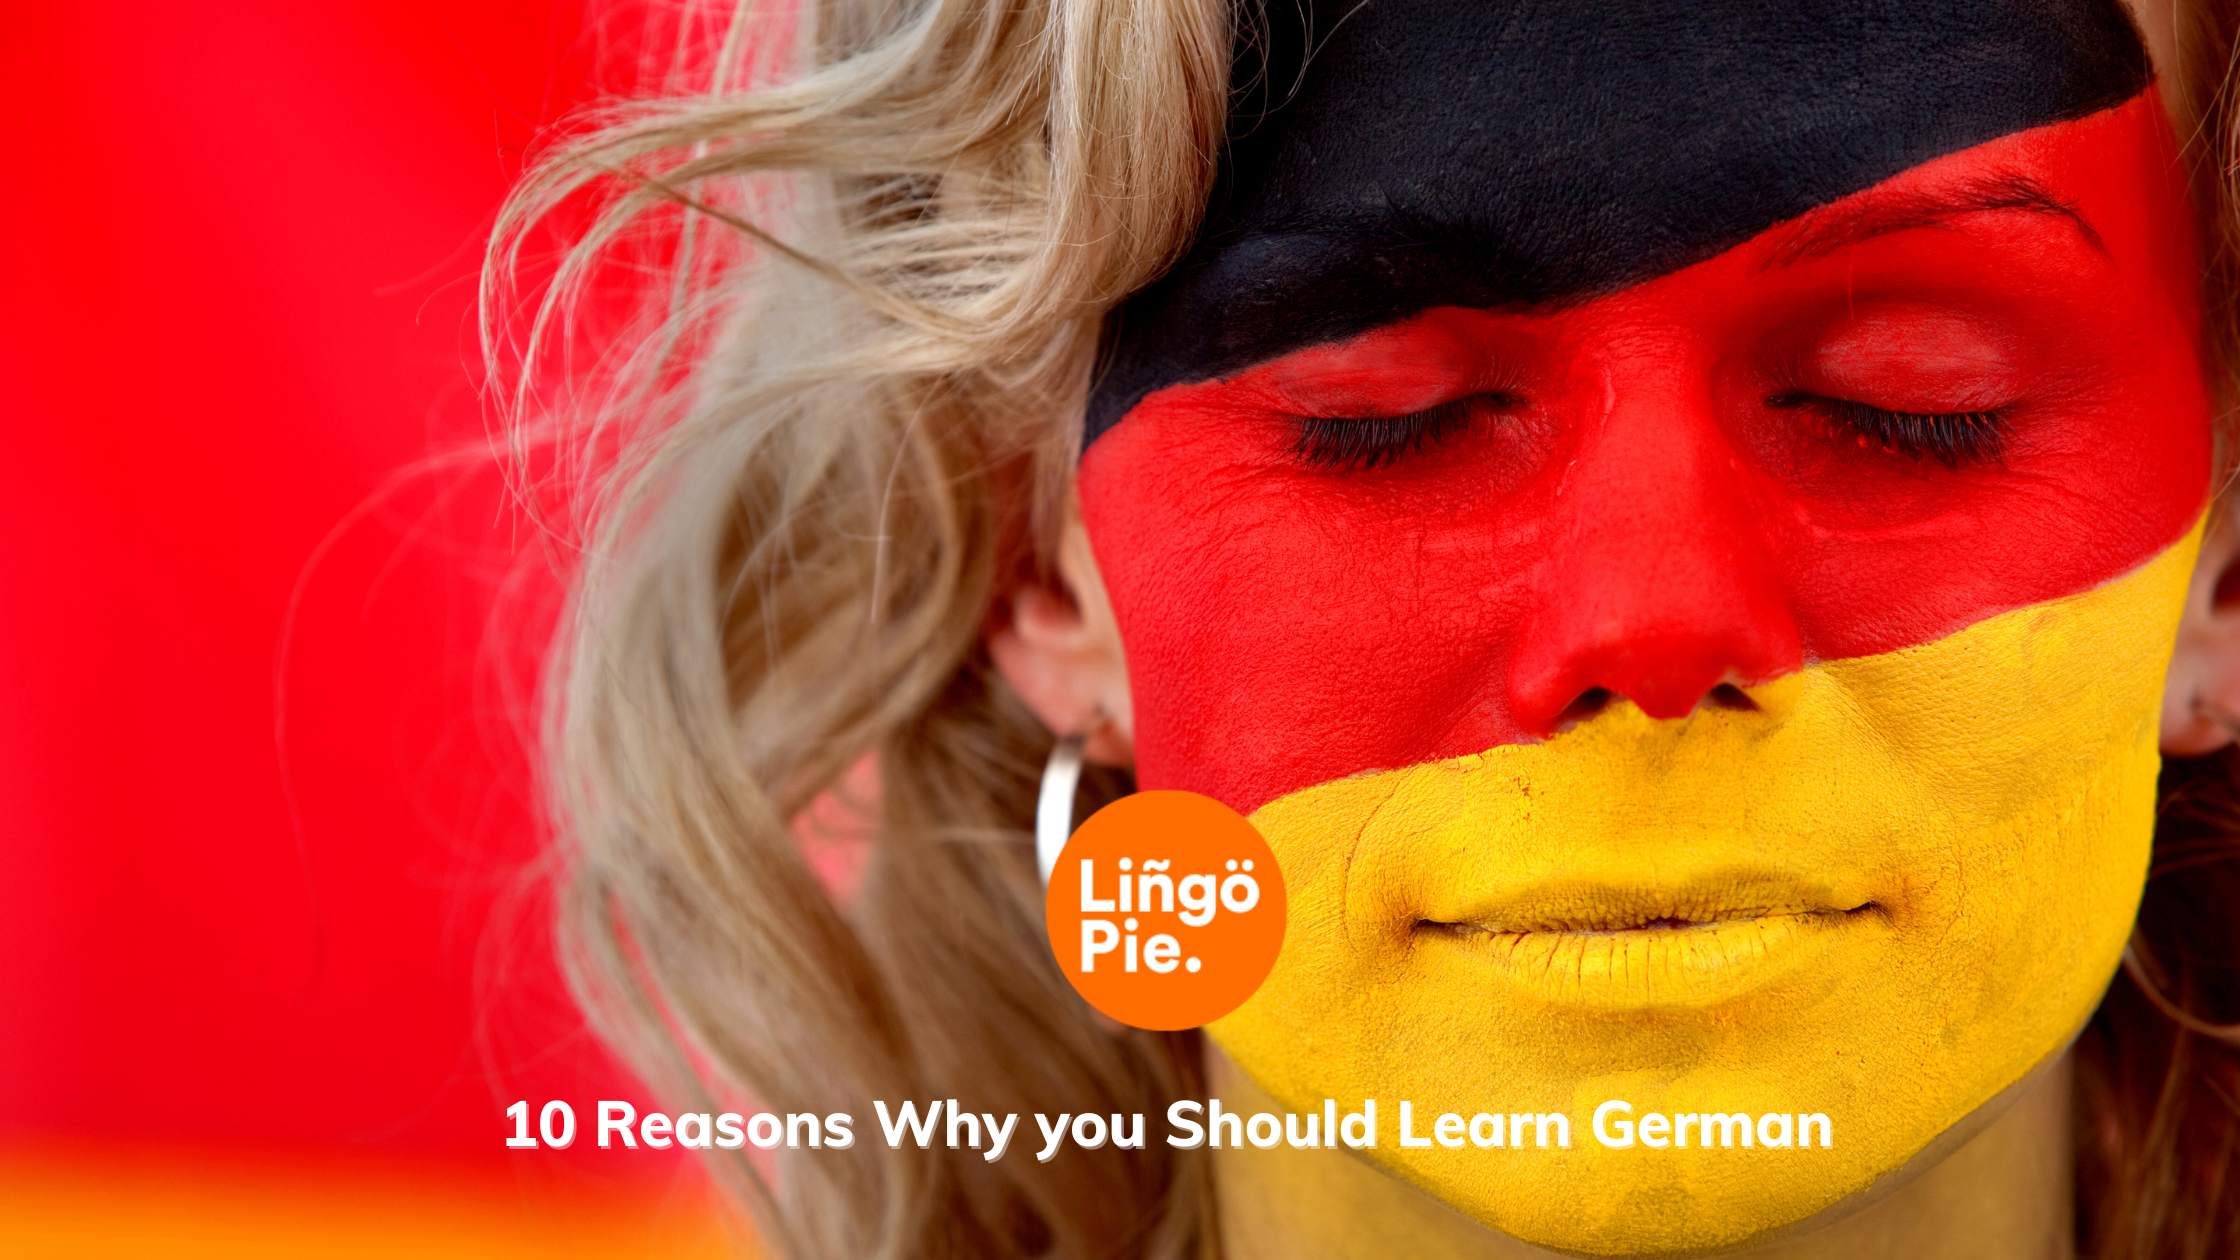 10 Reasons Why to Learn German - Unlock a World of Possibilities!